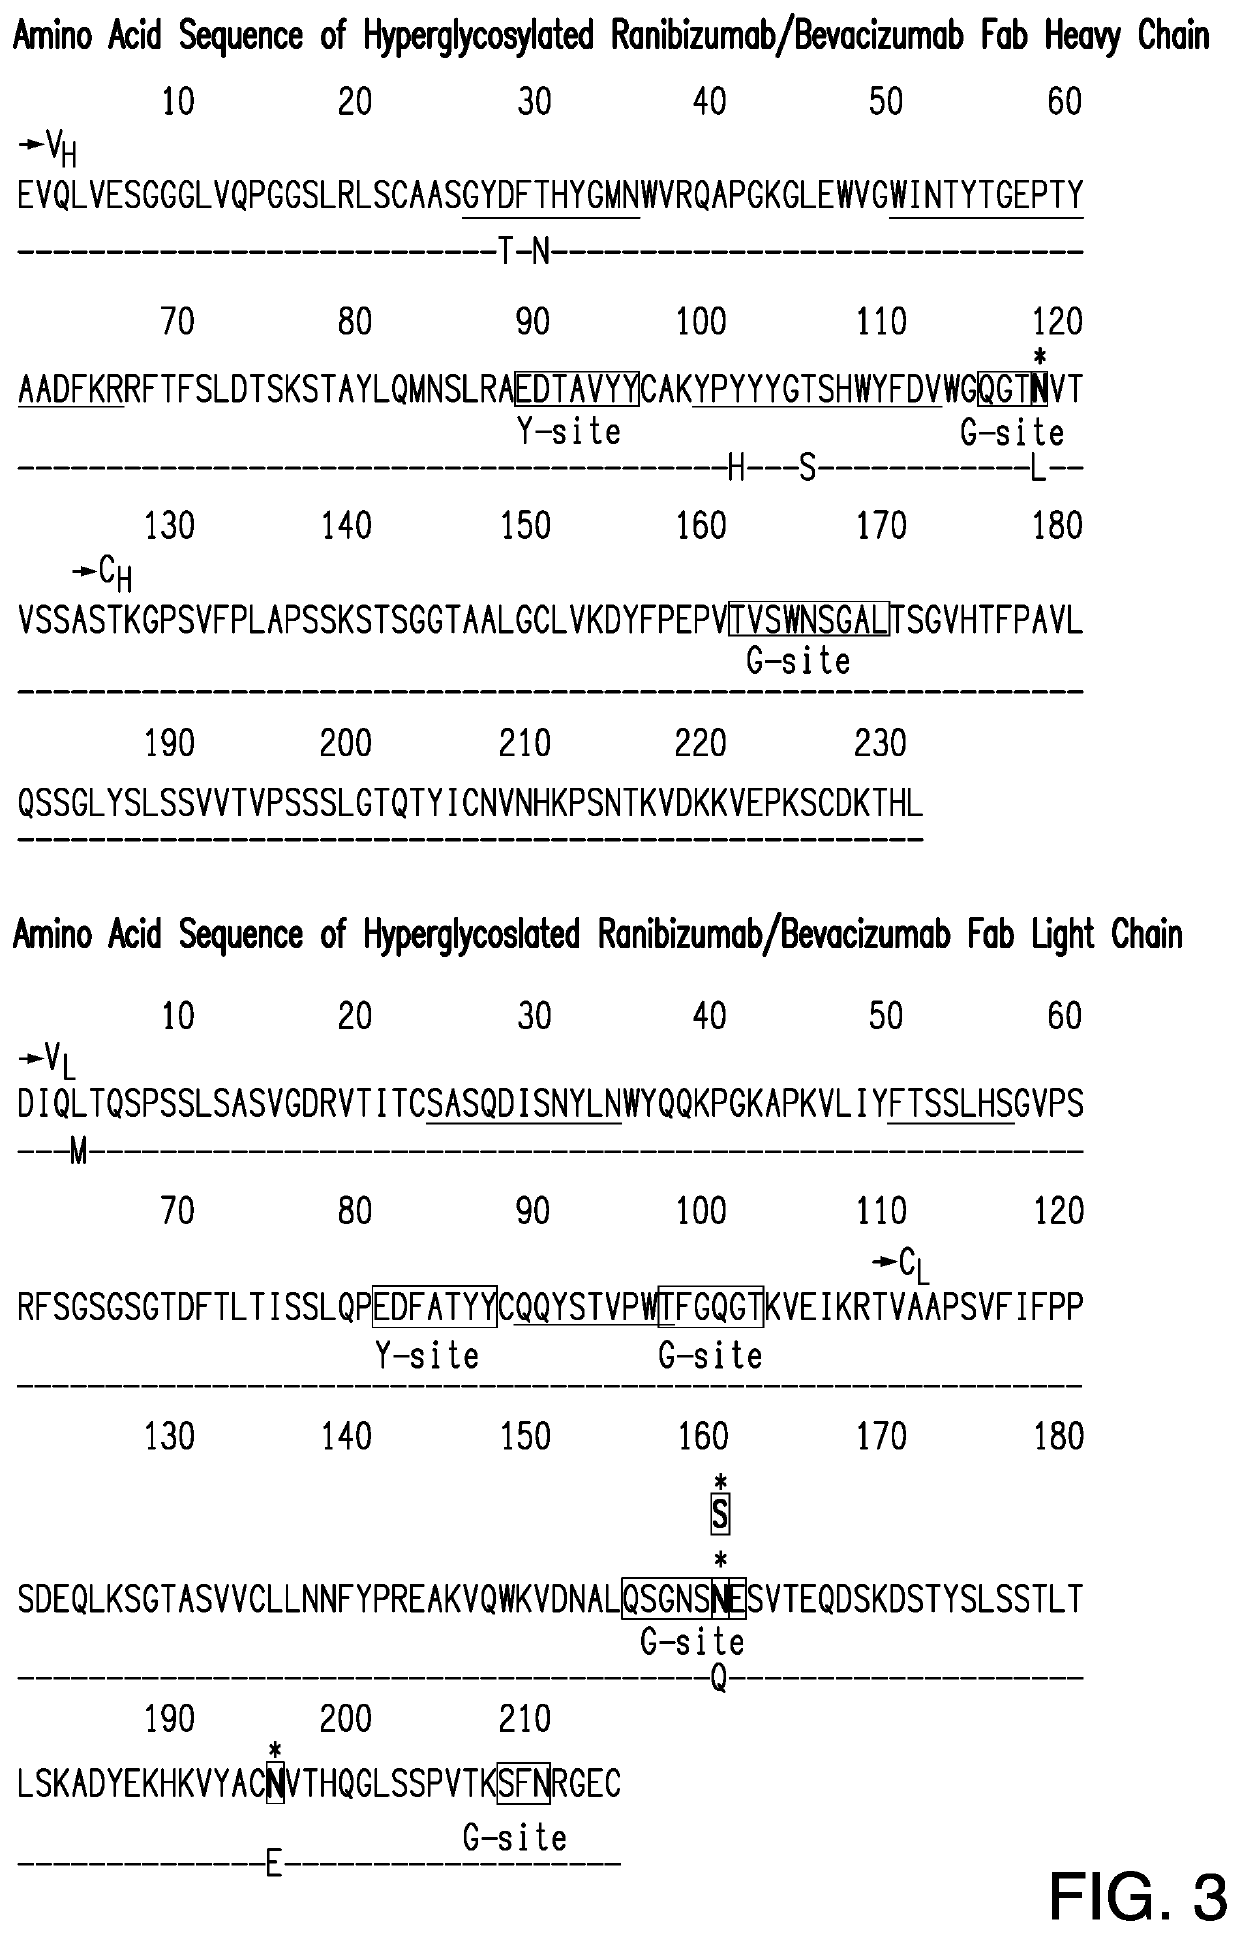 TREATMENT OF OCULAR DISEASES WITH FULLY-HUMAN POST-TRANSLATIONALLY MODIFIED ANTI-VEGF Fab